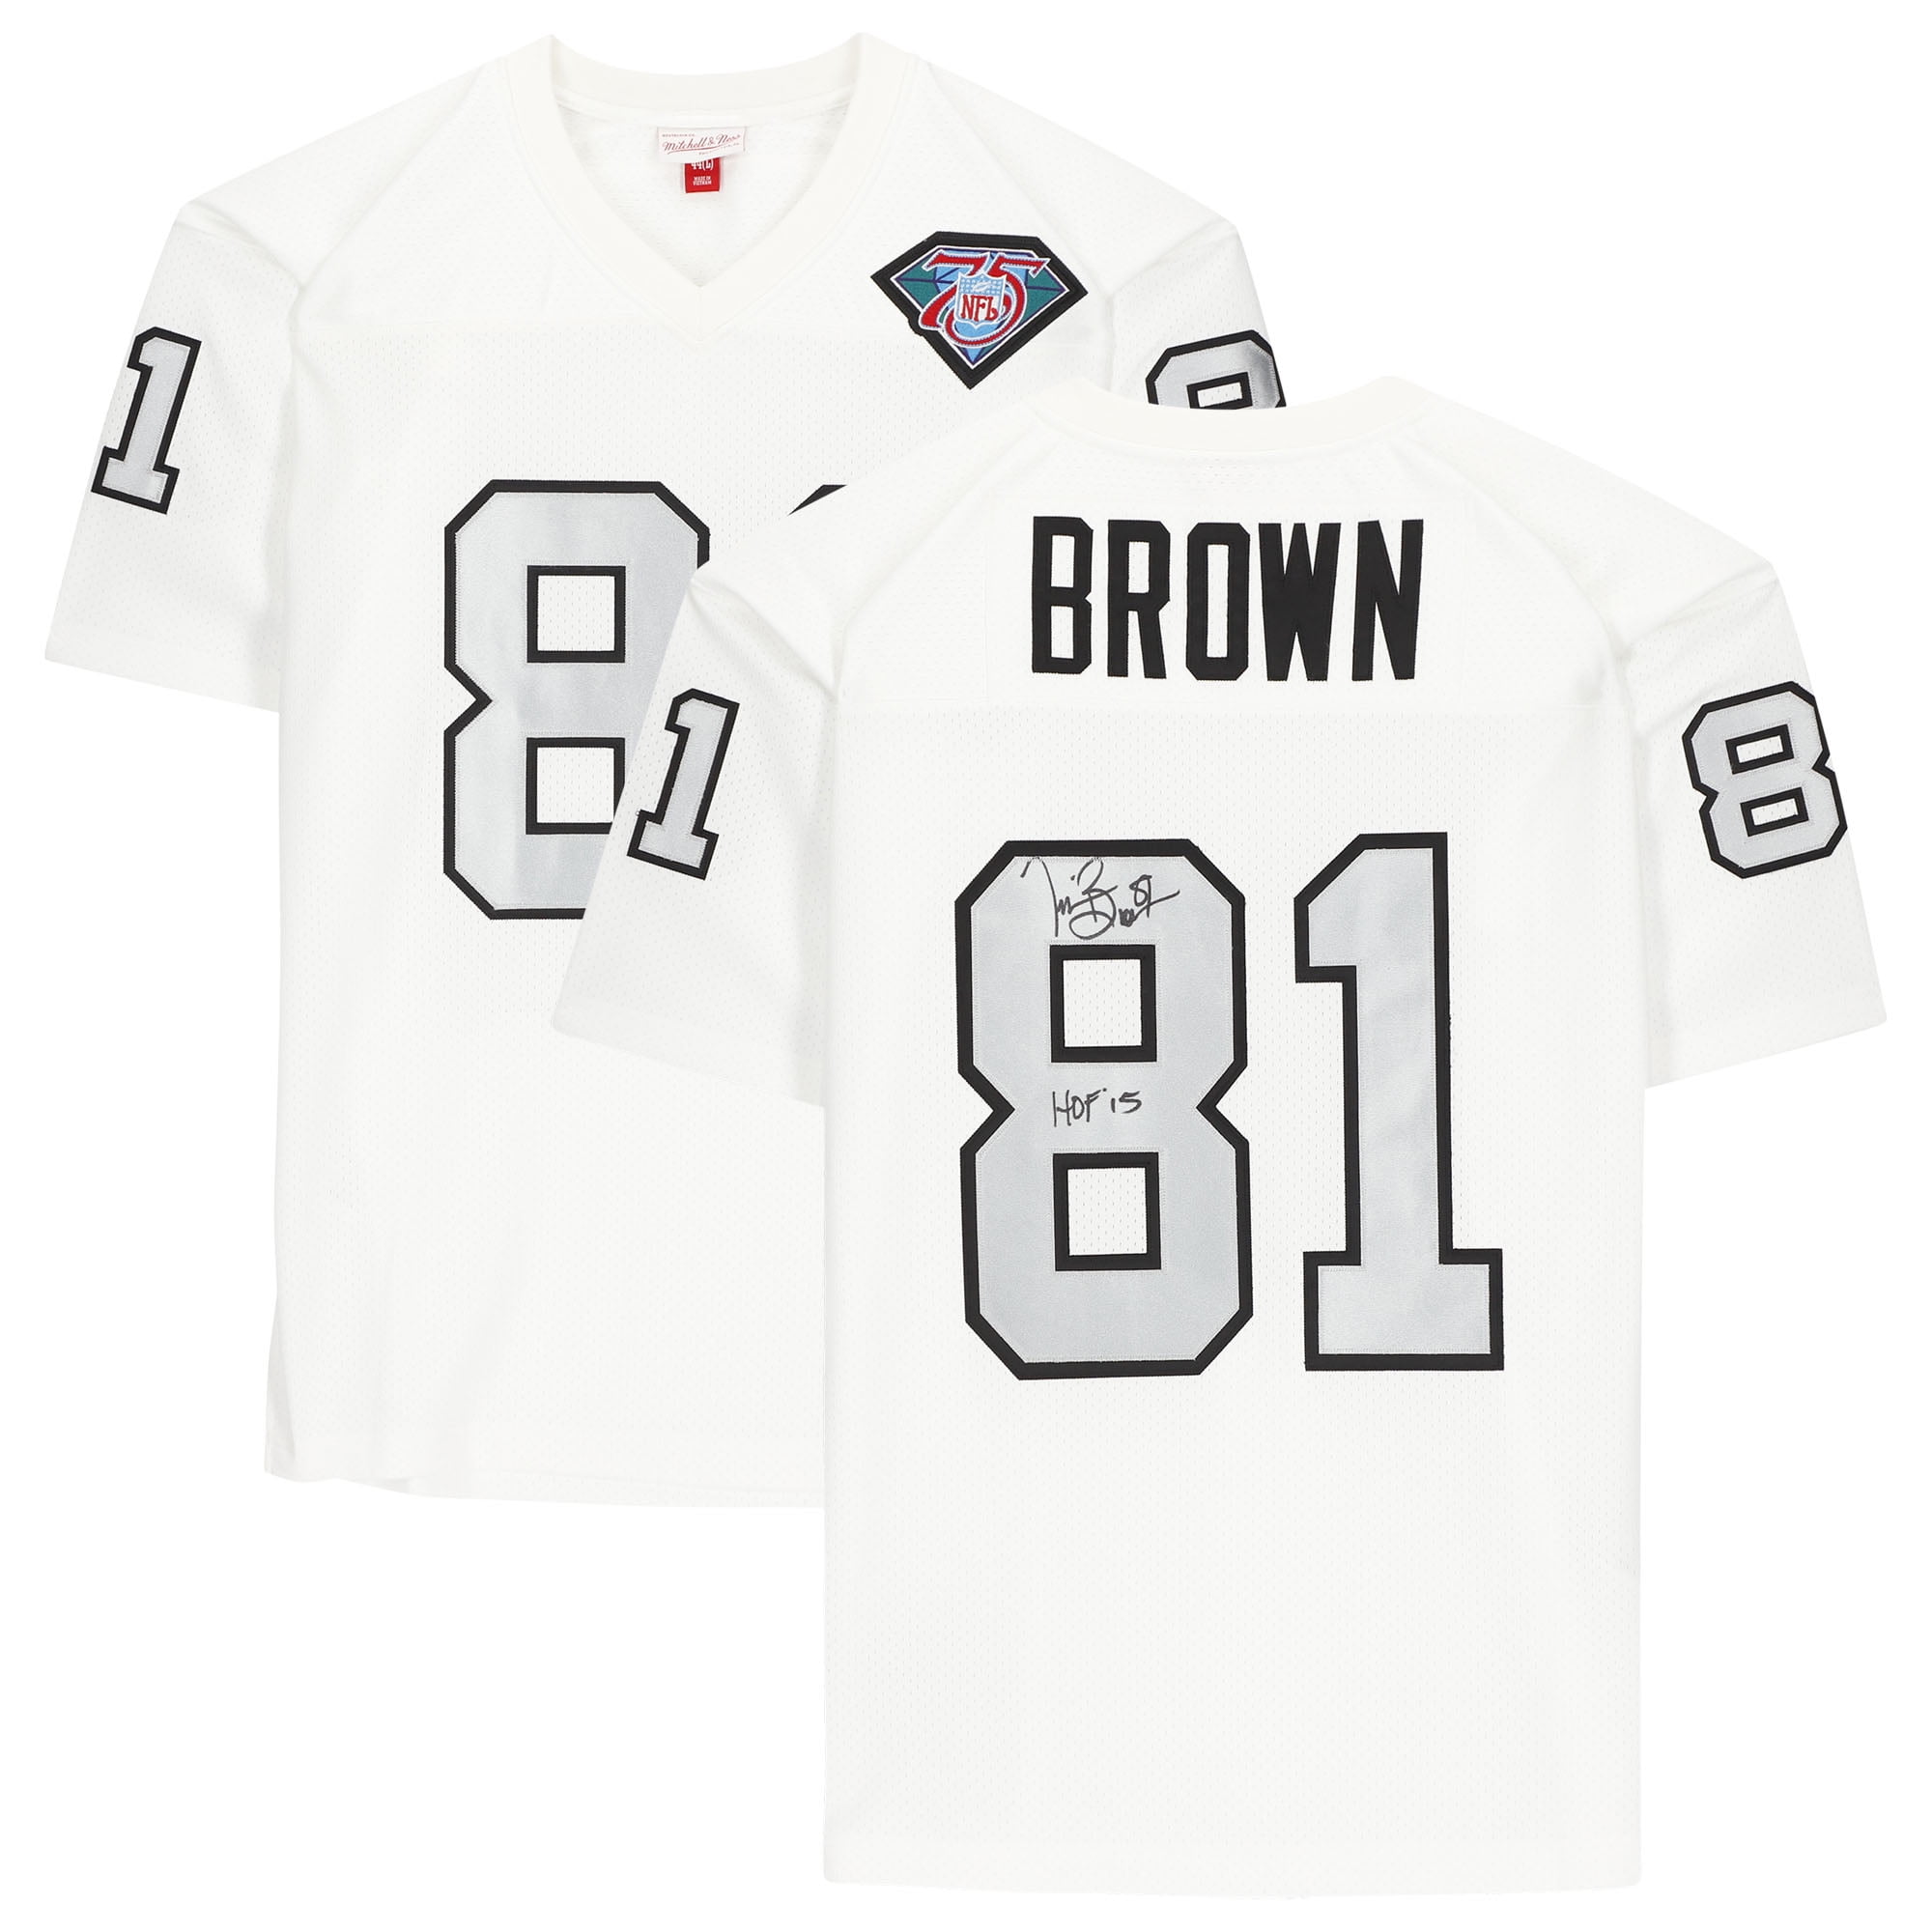 Buy the Signed Tim Brown Oakland Raiders Replica Black Jersey Sz. XL